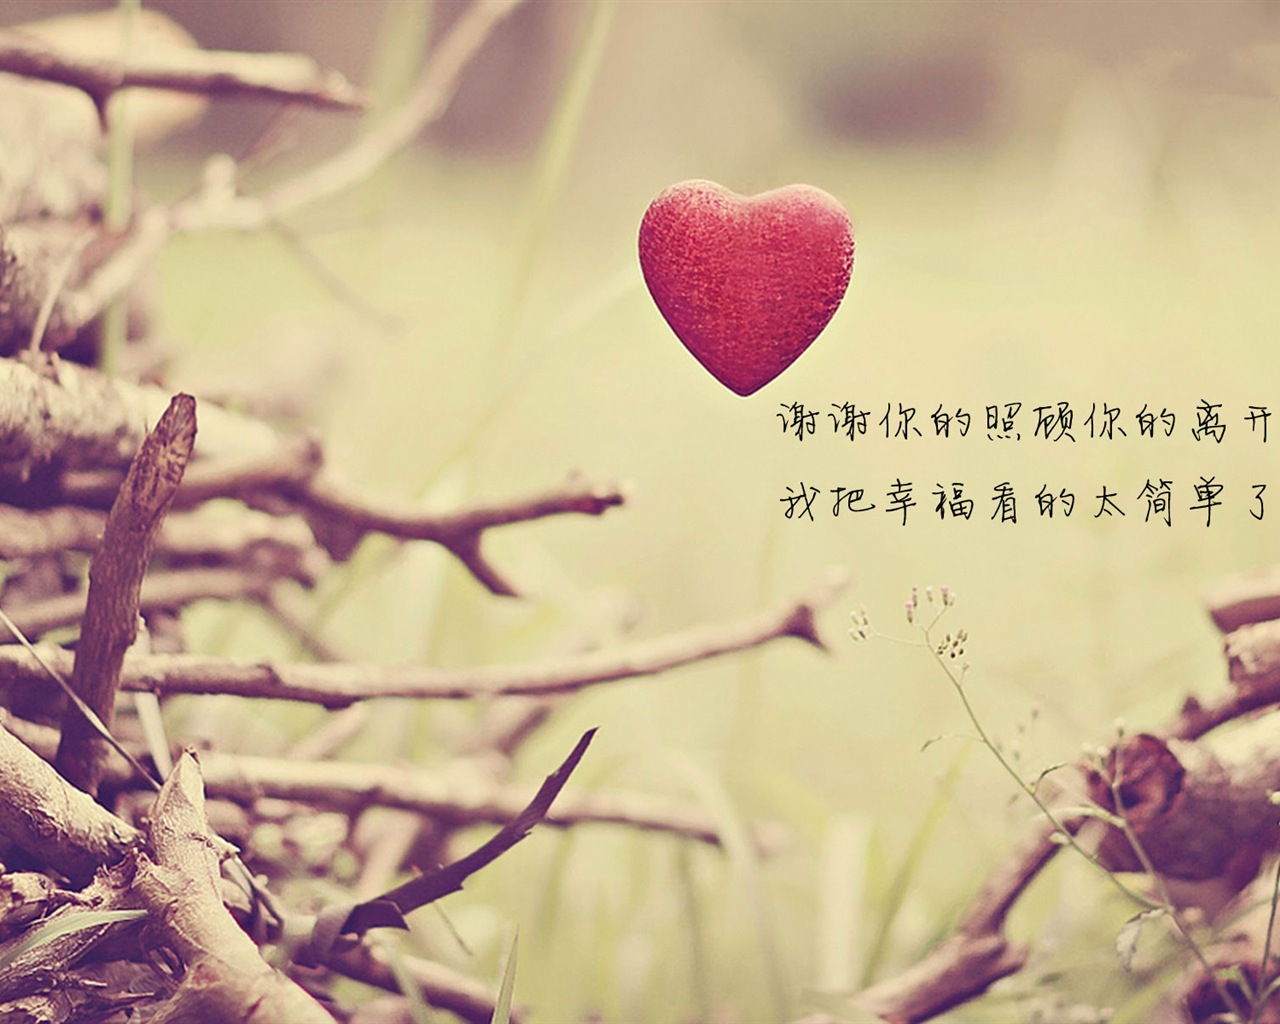 The theme of love, creative heart-shaped HD wallpapers #7 - 1280x1024